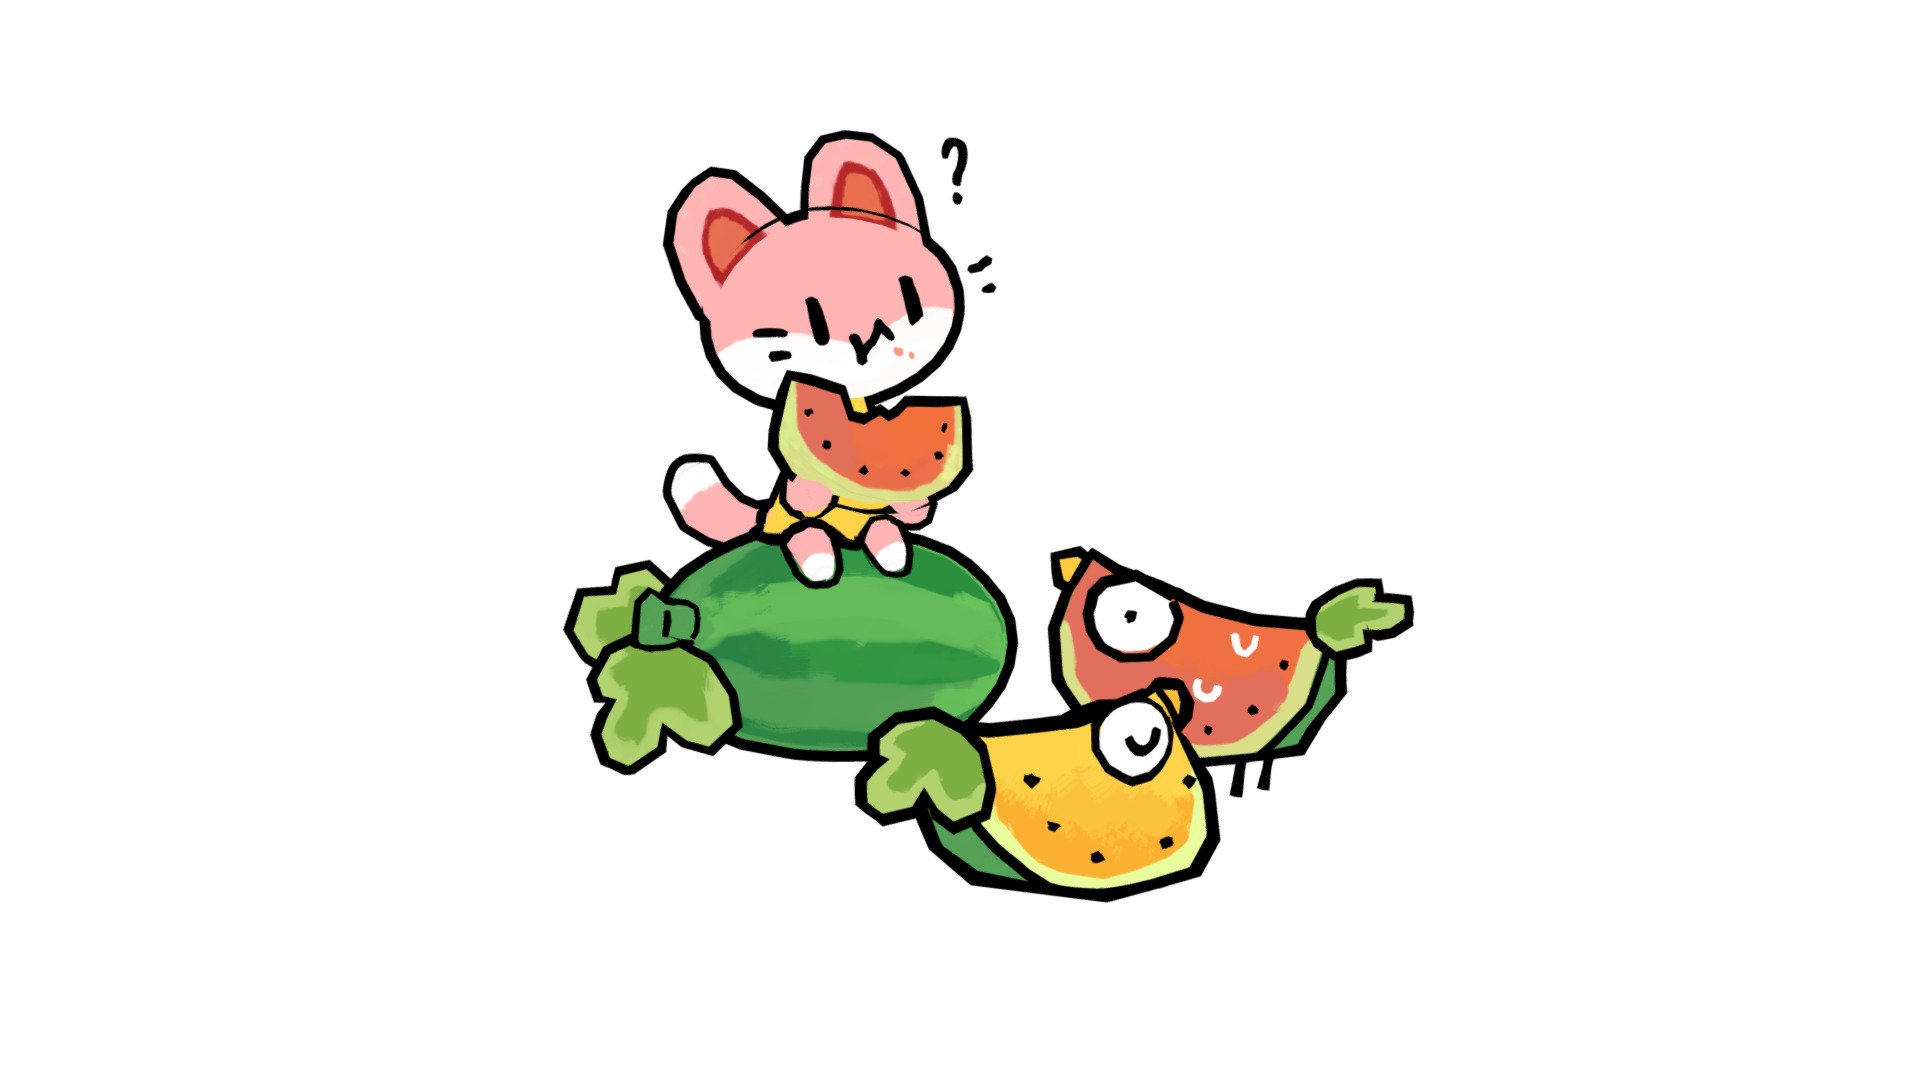 I haven't been creative for a year 😢
War, lots of sadness, blackouts, etc. got me depressed 😖
I wanted to do something new, and most importantly cute, so here’s Watermelons! 🍉

Btw it based on the artwork by stefscribbles
https://twitter.com/stefscribbles/status/1283748697180954624 - Watermelon 🍉 - 3D model by Pixel_Lime 3d model